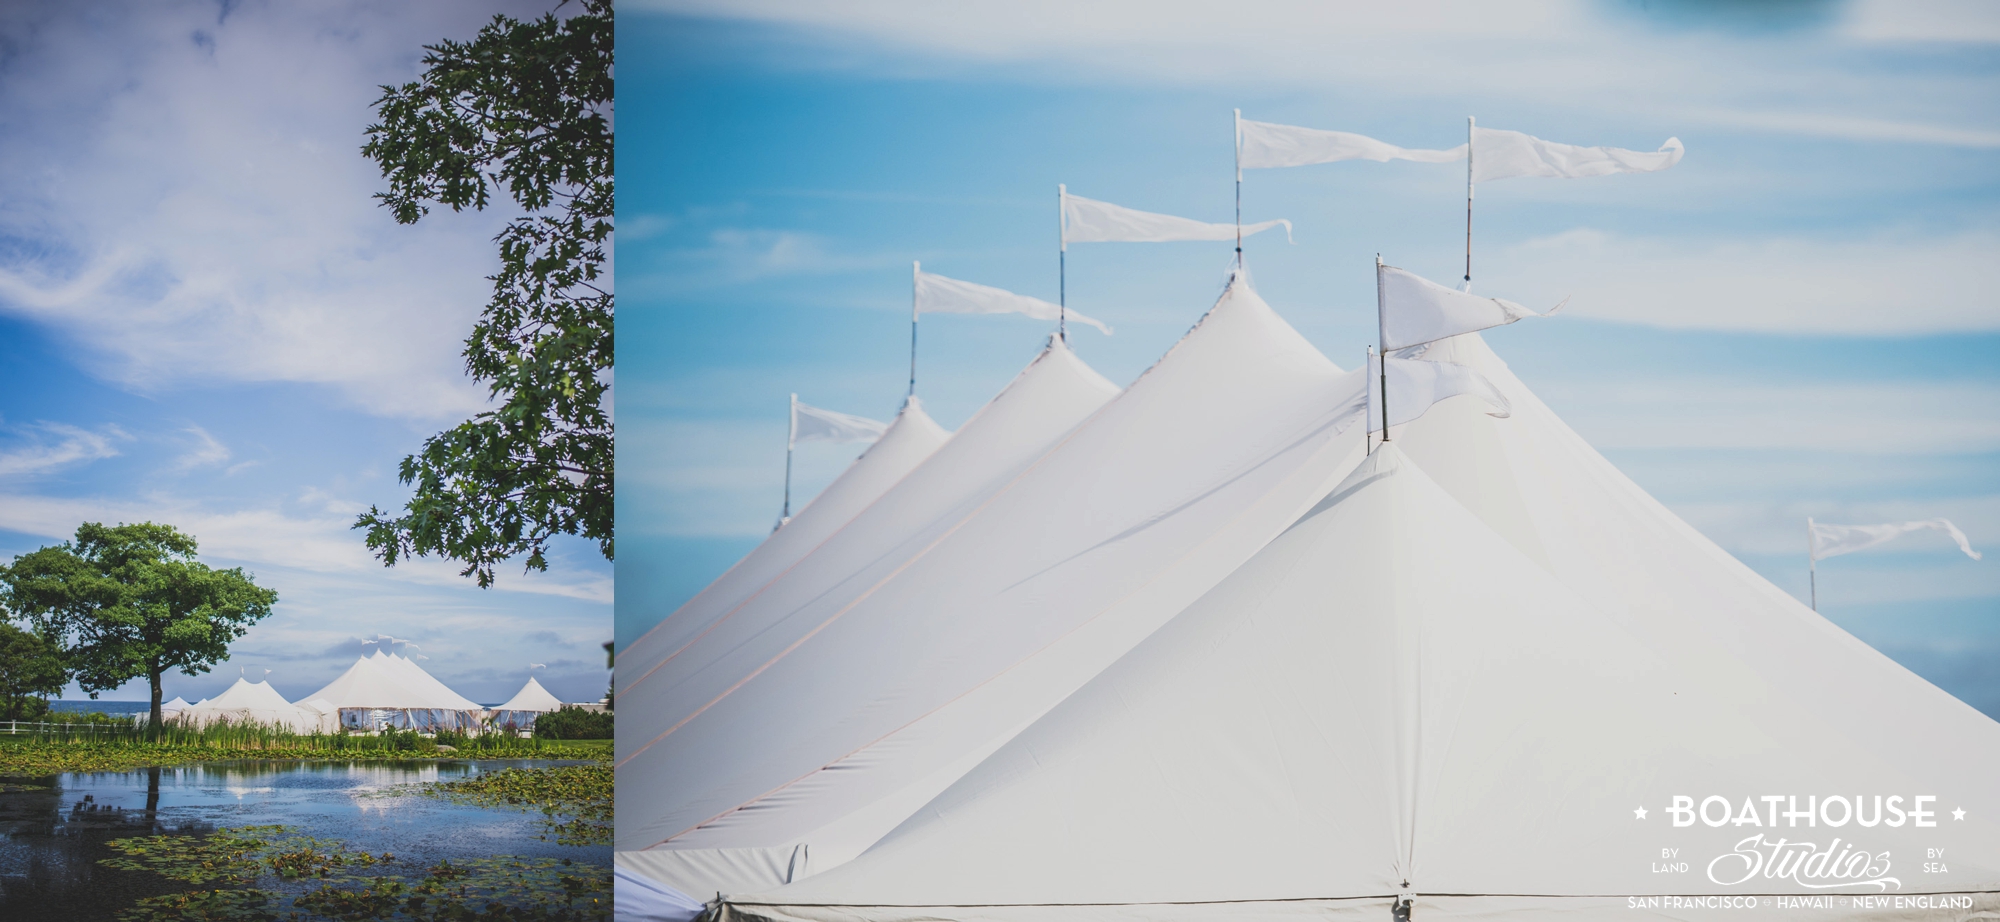 Unbelievable Tented Reception by the ocean in Kennebunkport, Maine.